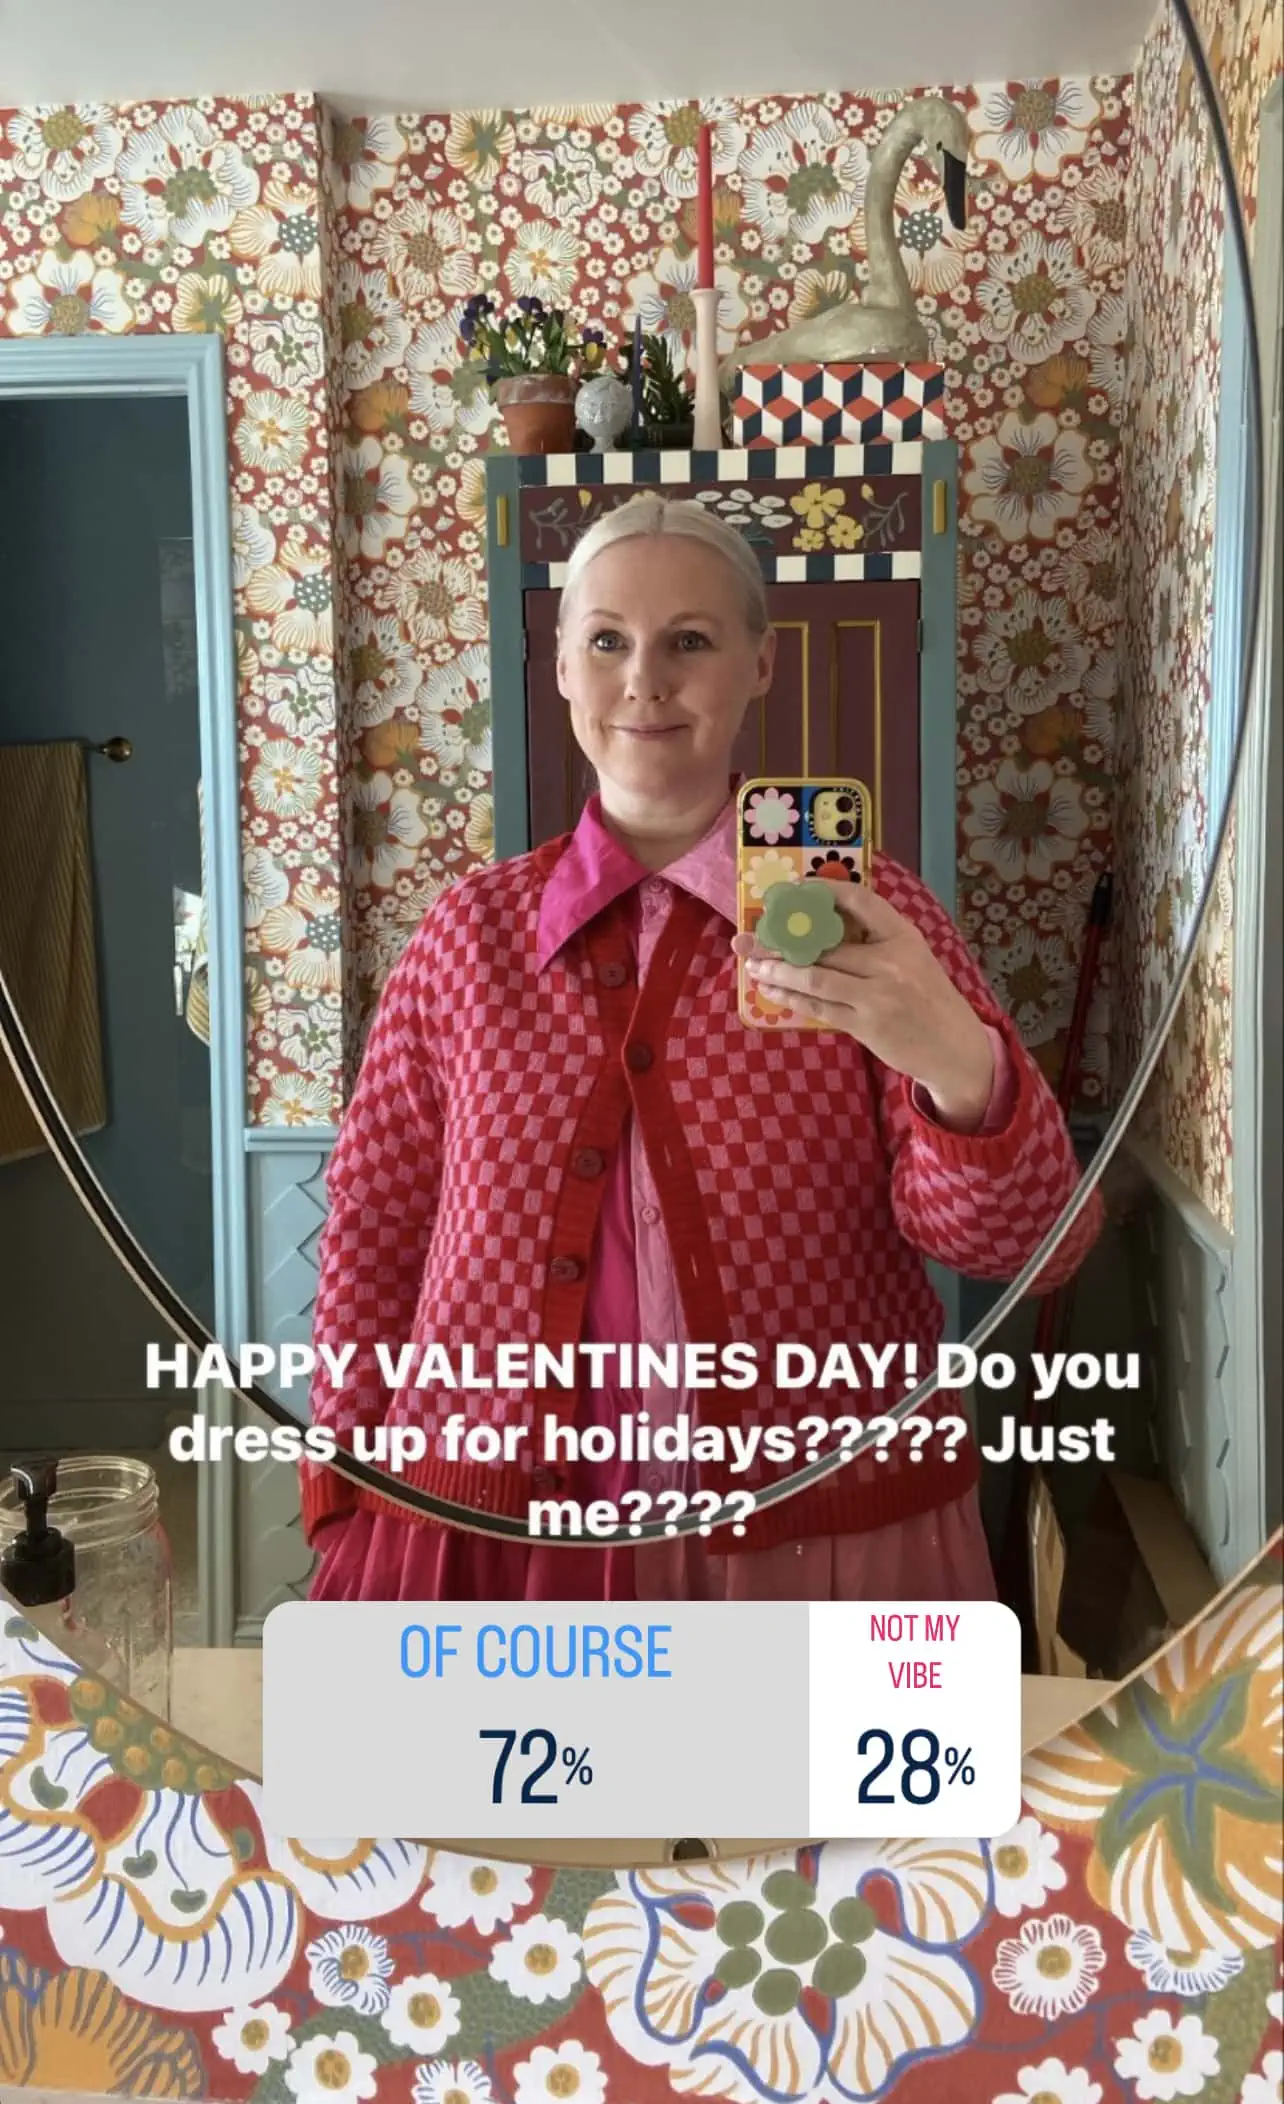 wearing red and pink on Valentine's Day